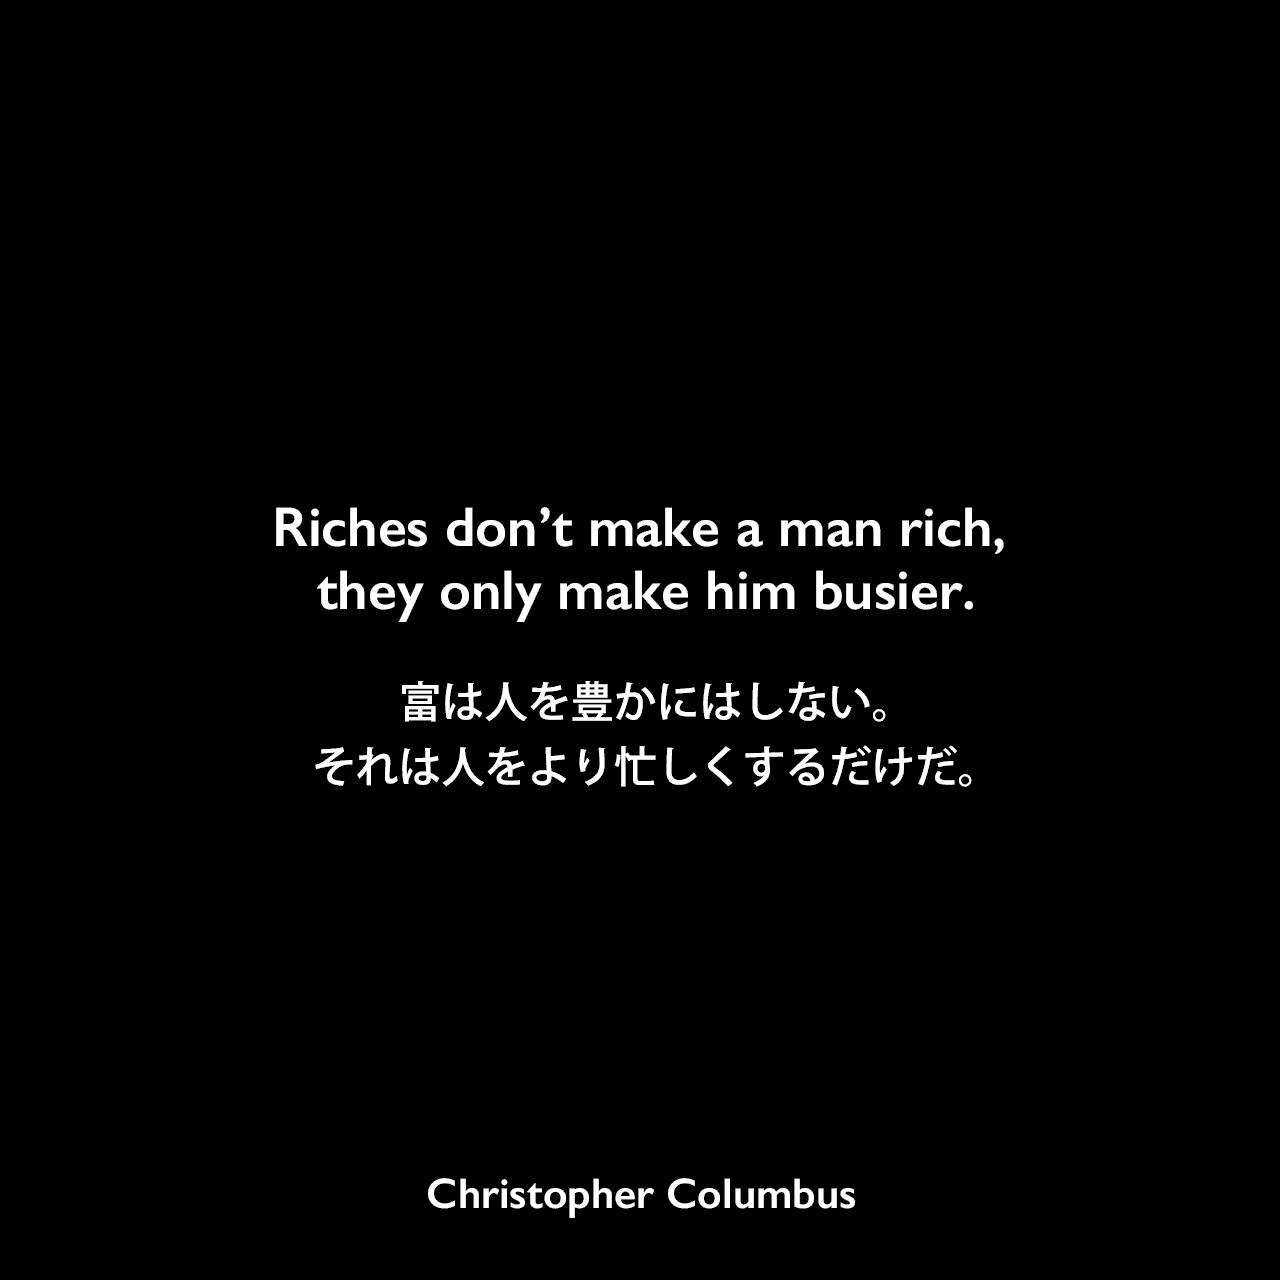 Riches don’t make a man rich, they only make him busier.富は人を豊かにはしない。それは人をより忙しくするだけだ。Christopher Columbus